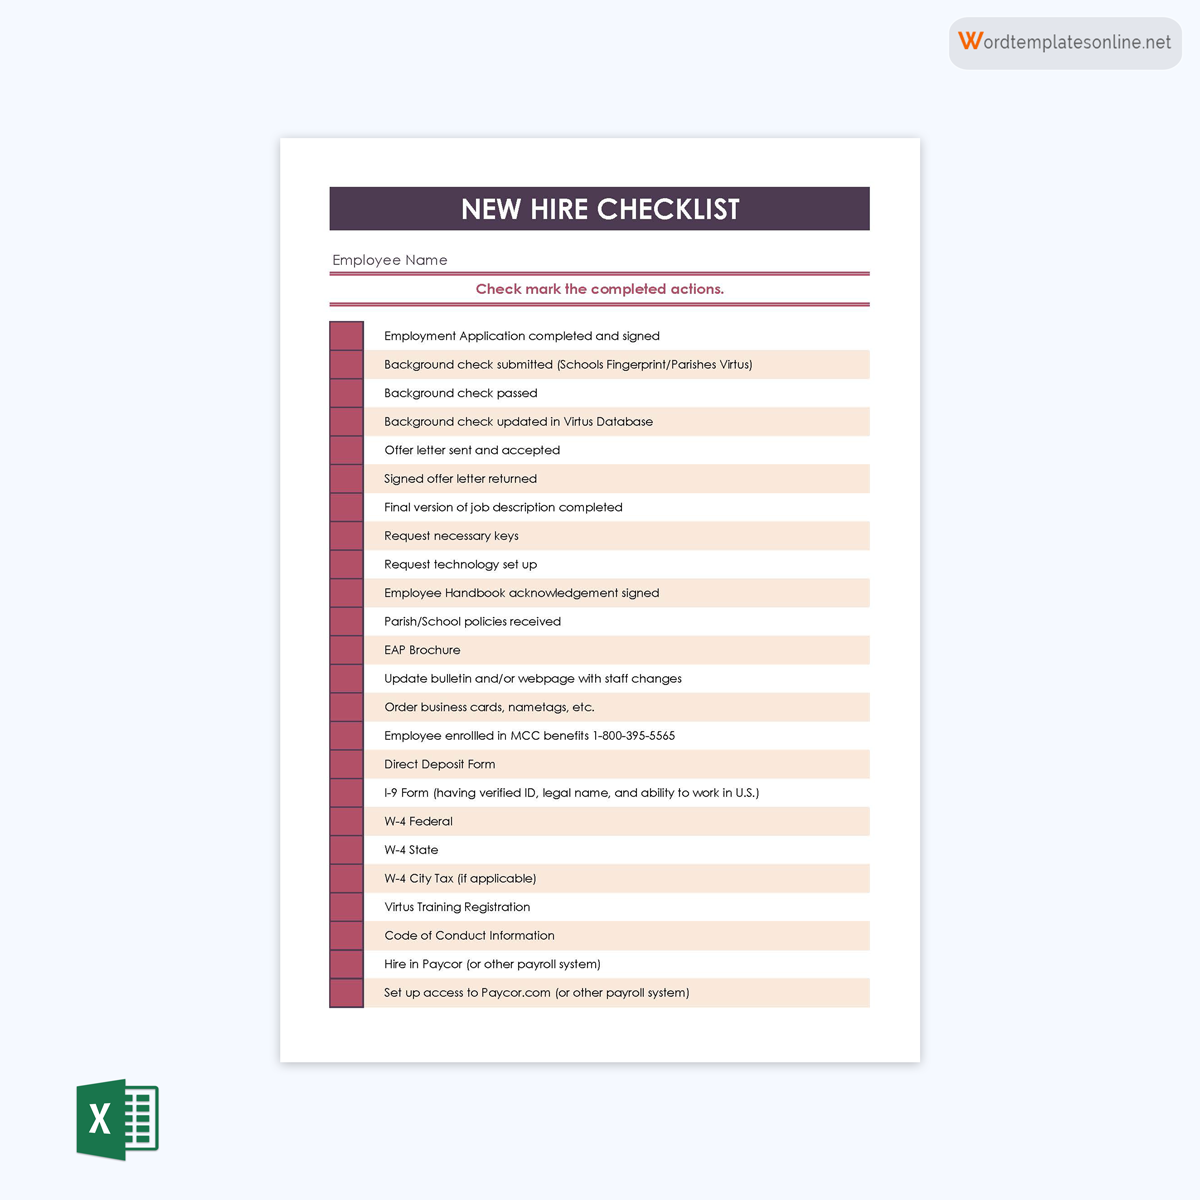 Free Downloadable Completed Actions New Hire Checklist Template for Excel Sheet